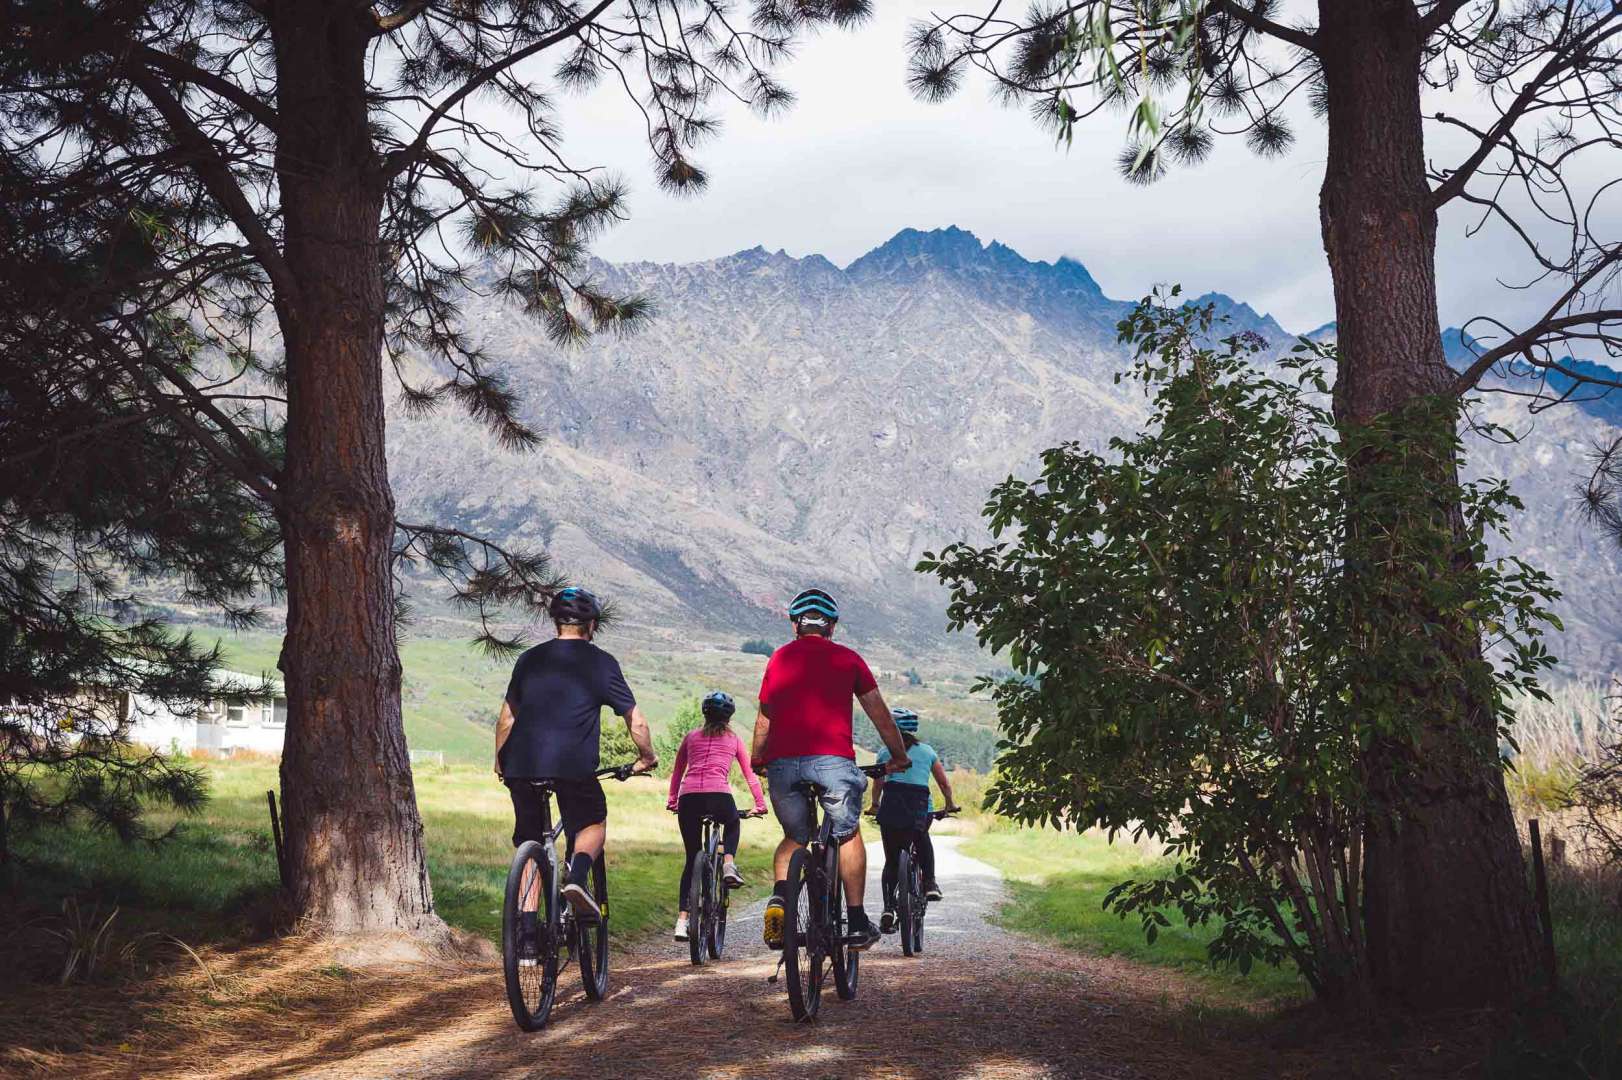 Adult and Kids Bike Hire. Collect and return your mountain bike from central Queenstown